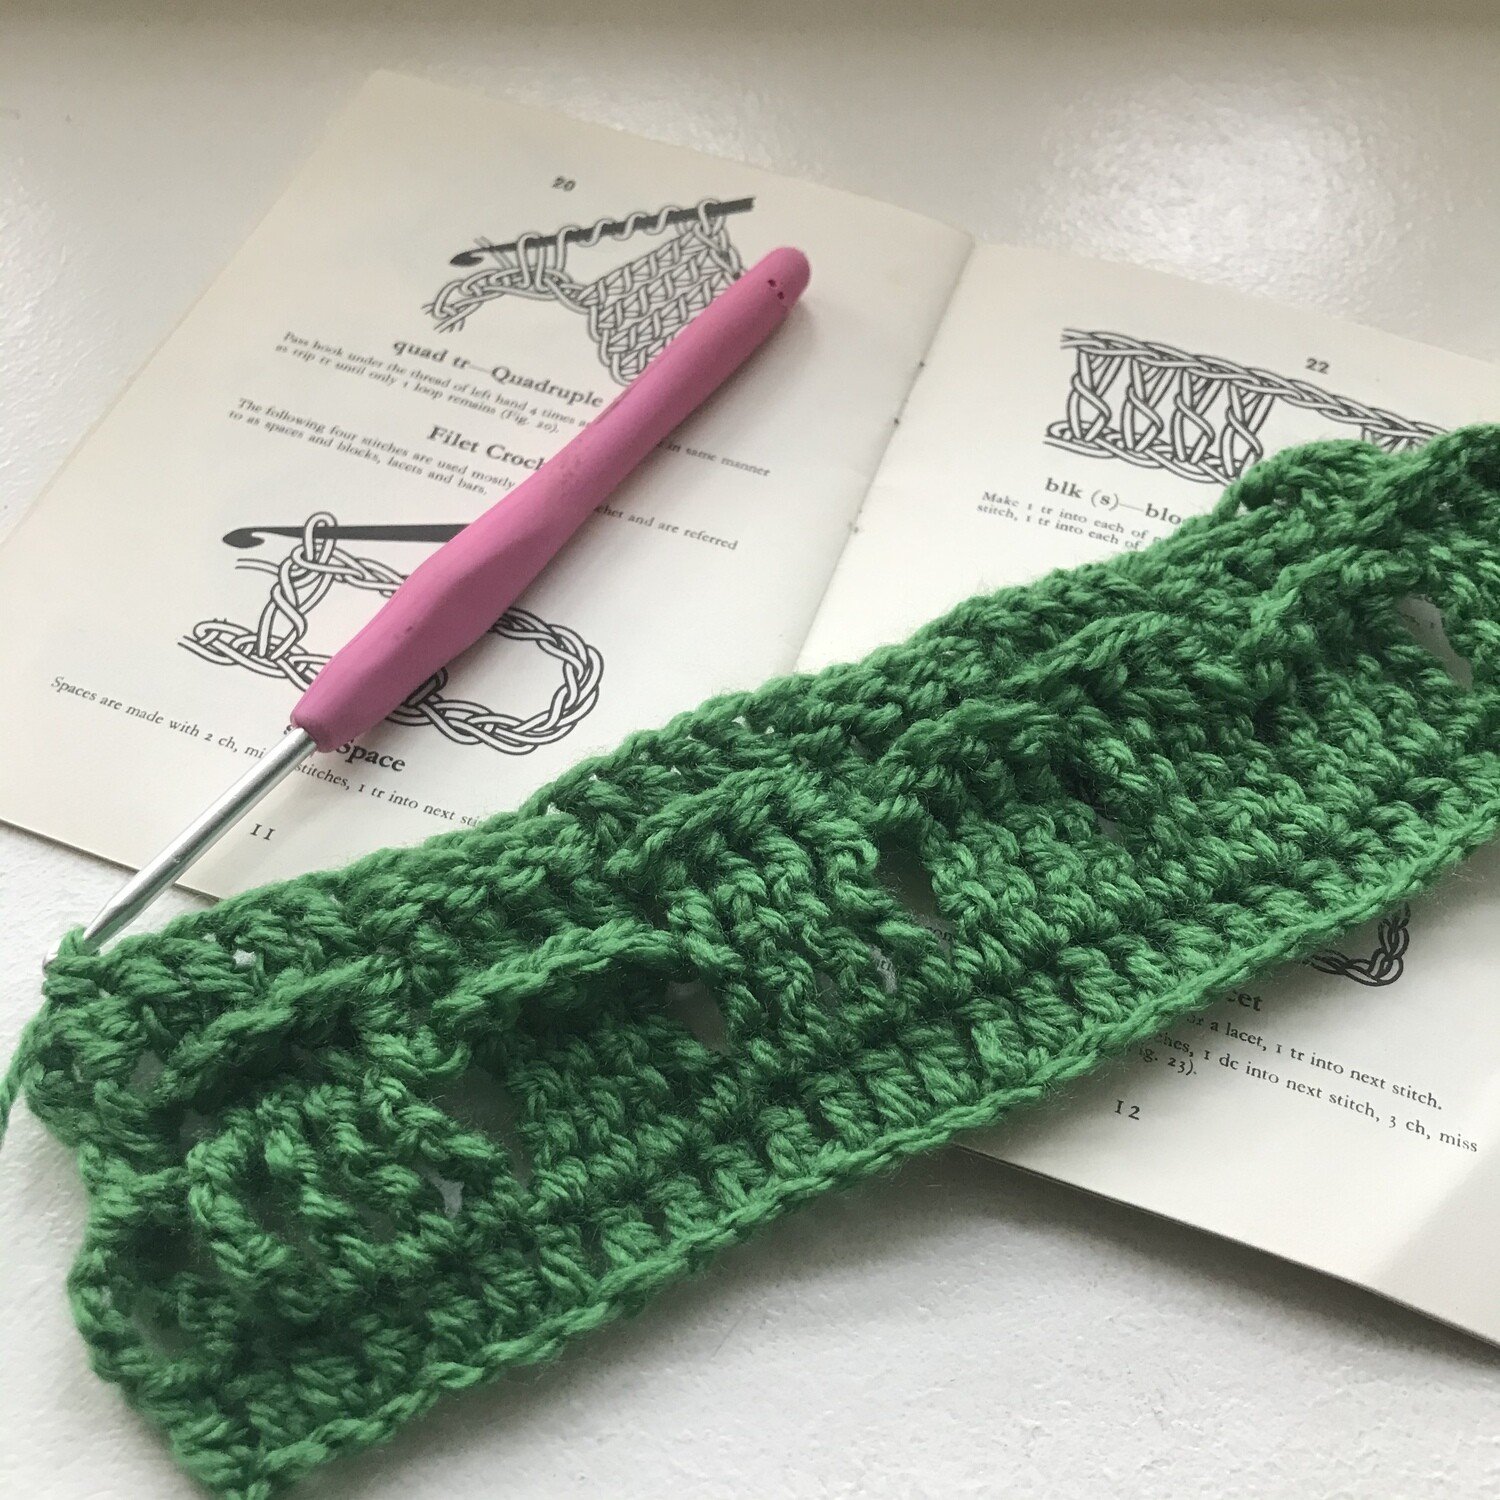 Crocheting Course Learn at Home Live with Rachel - Intermediate - One to One